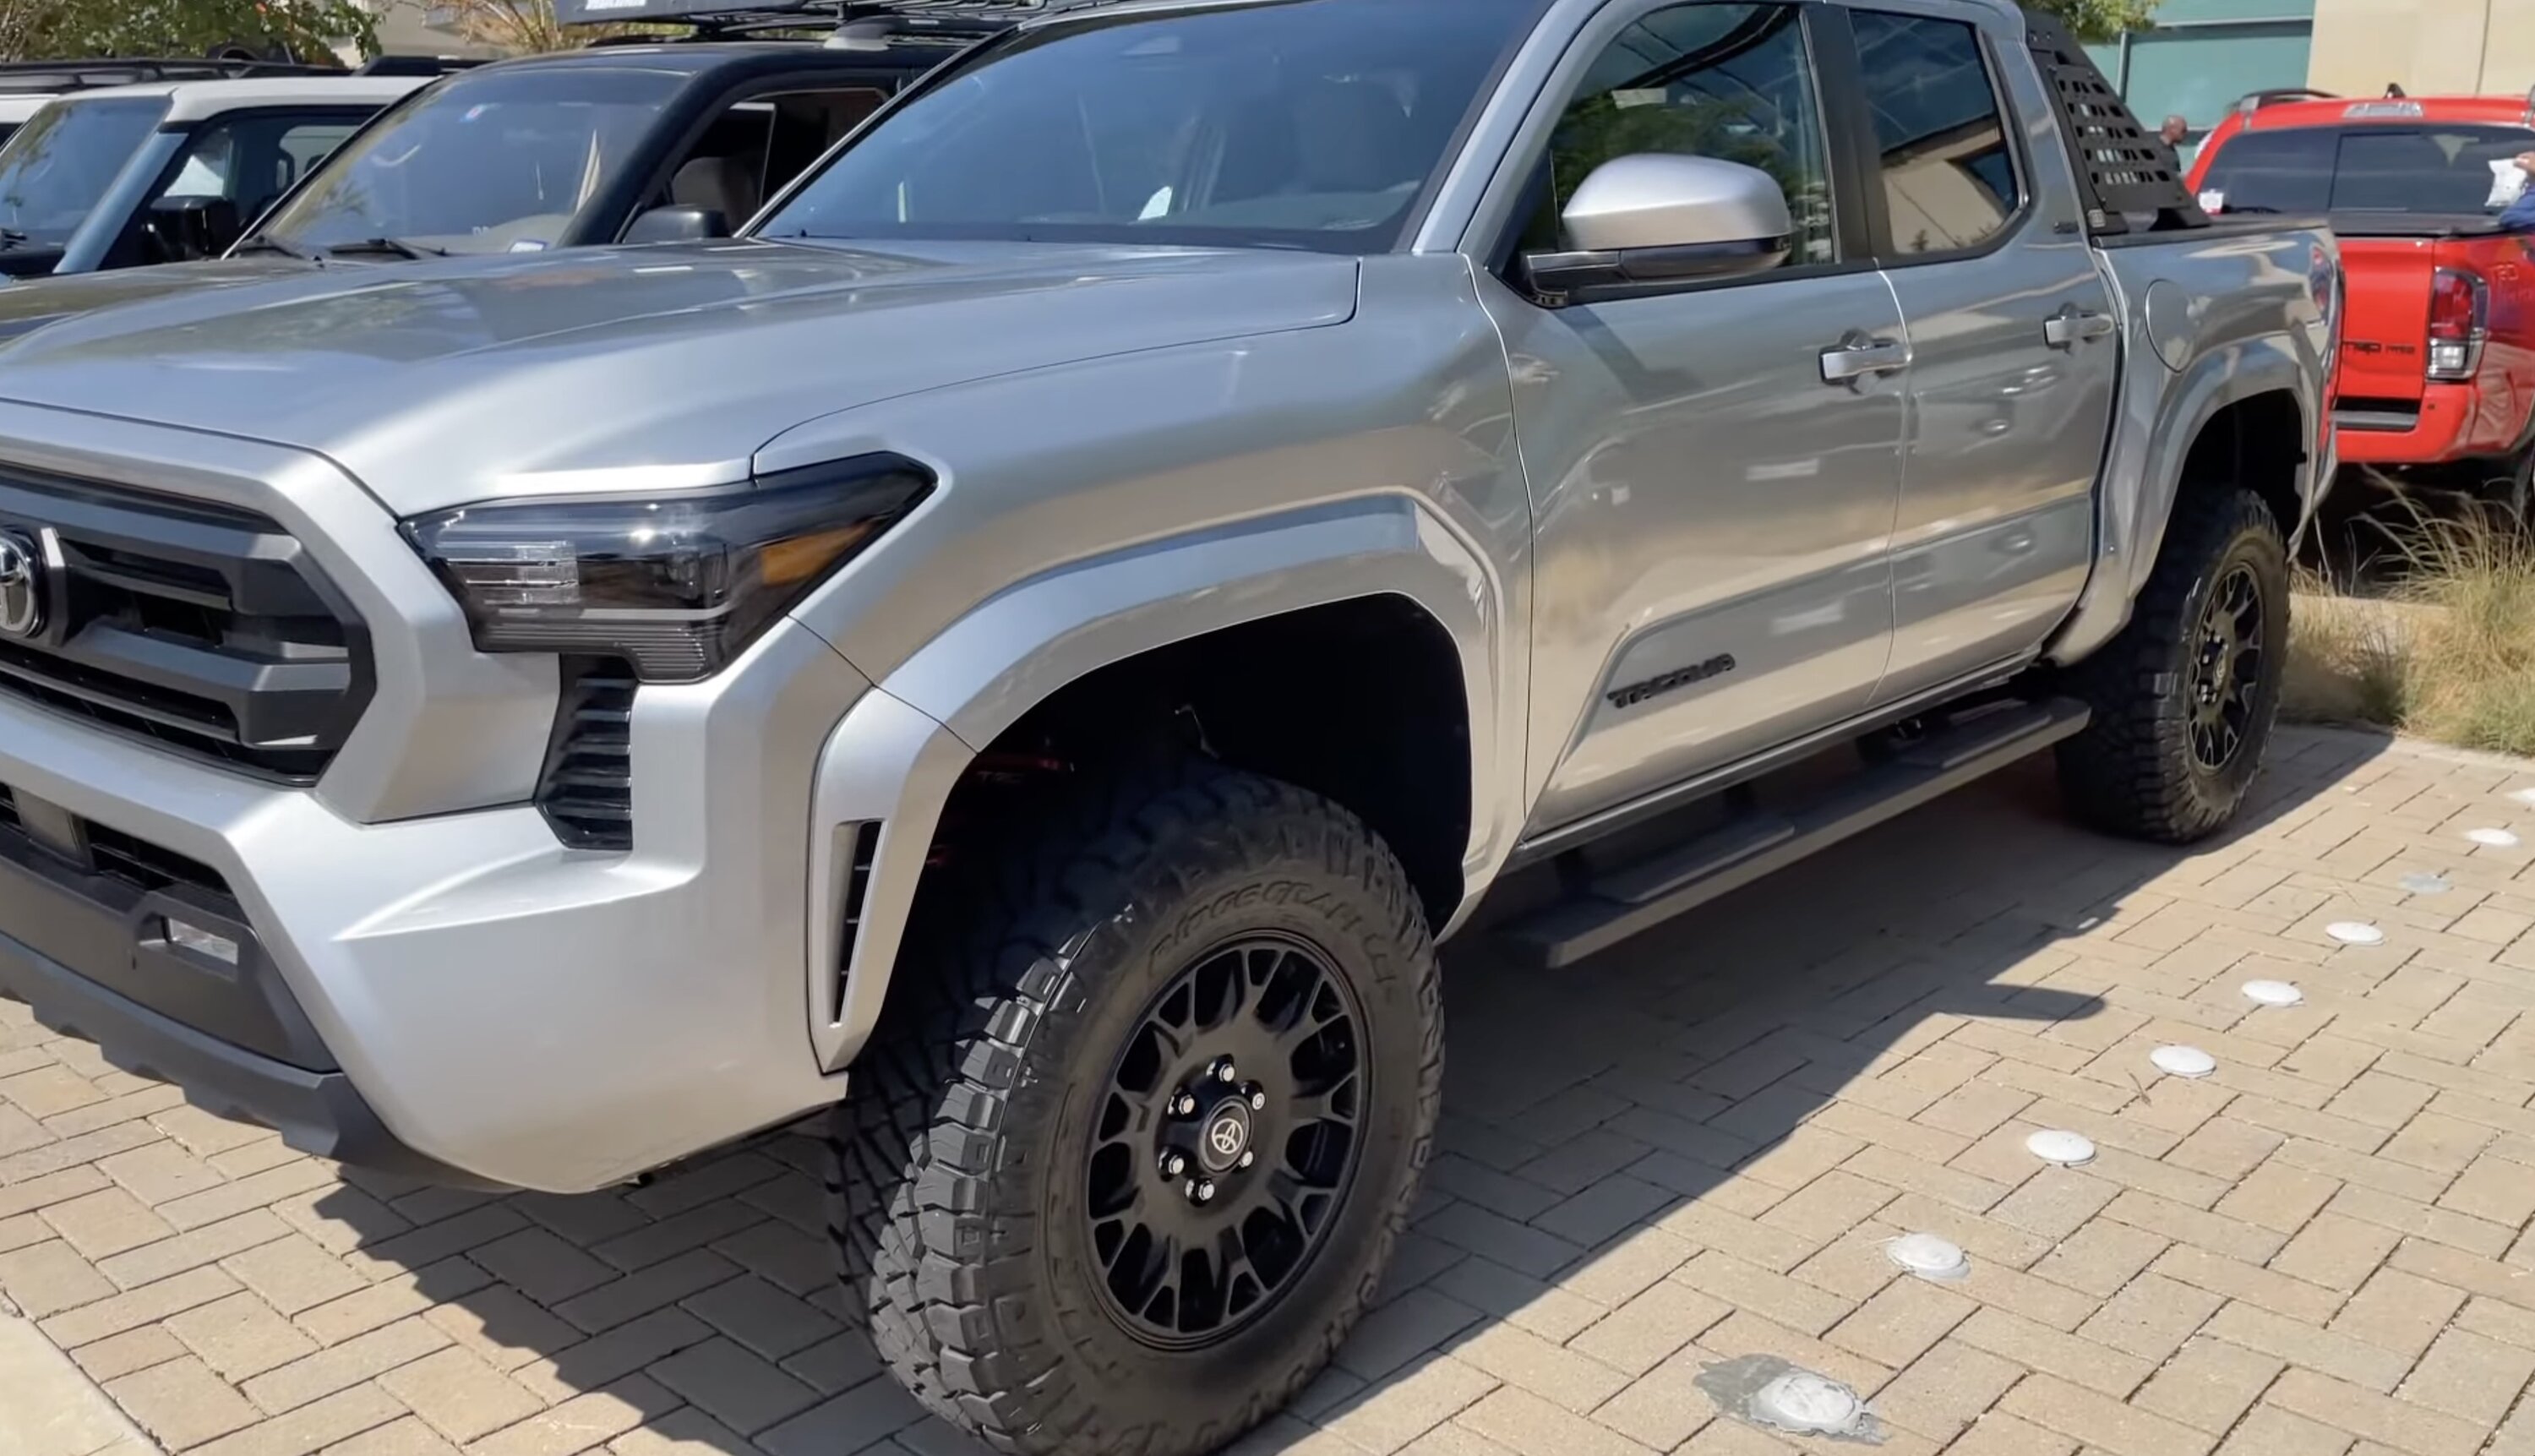 2024 Tacoma Official CELESTIAL SILVER METALLIC 2024 Tacoma Thread (4th Gen) Celestial Silver 2024 Tacom SR5 TRD Lift Kit 2.5 2.0 inches springs struts 1